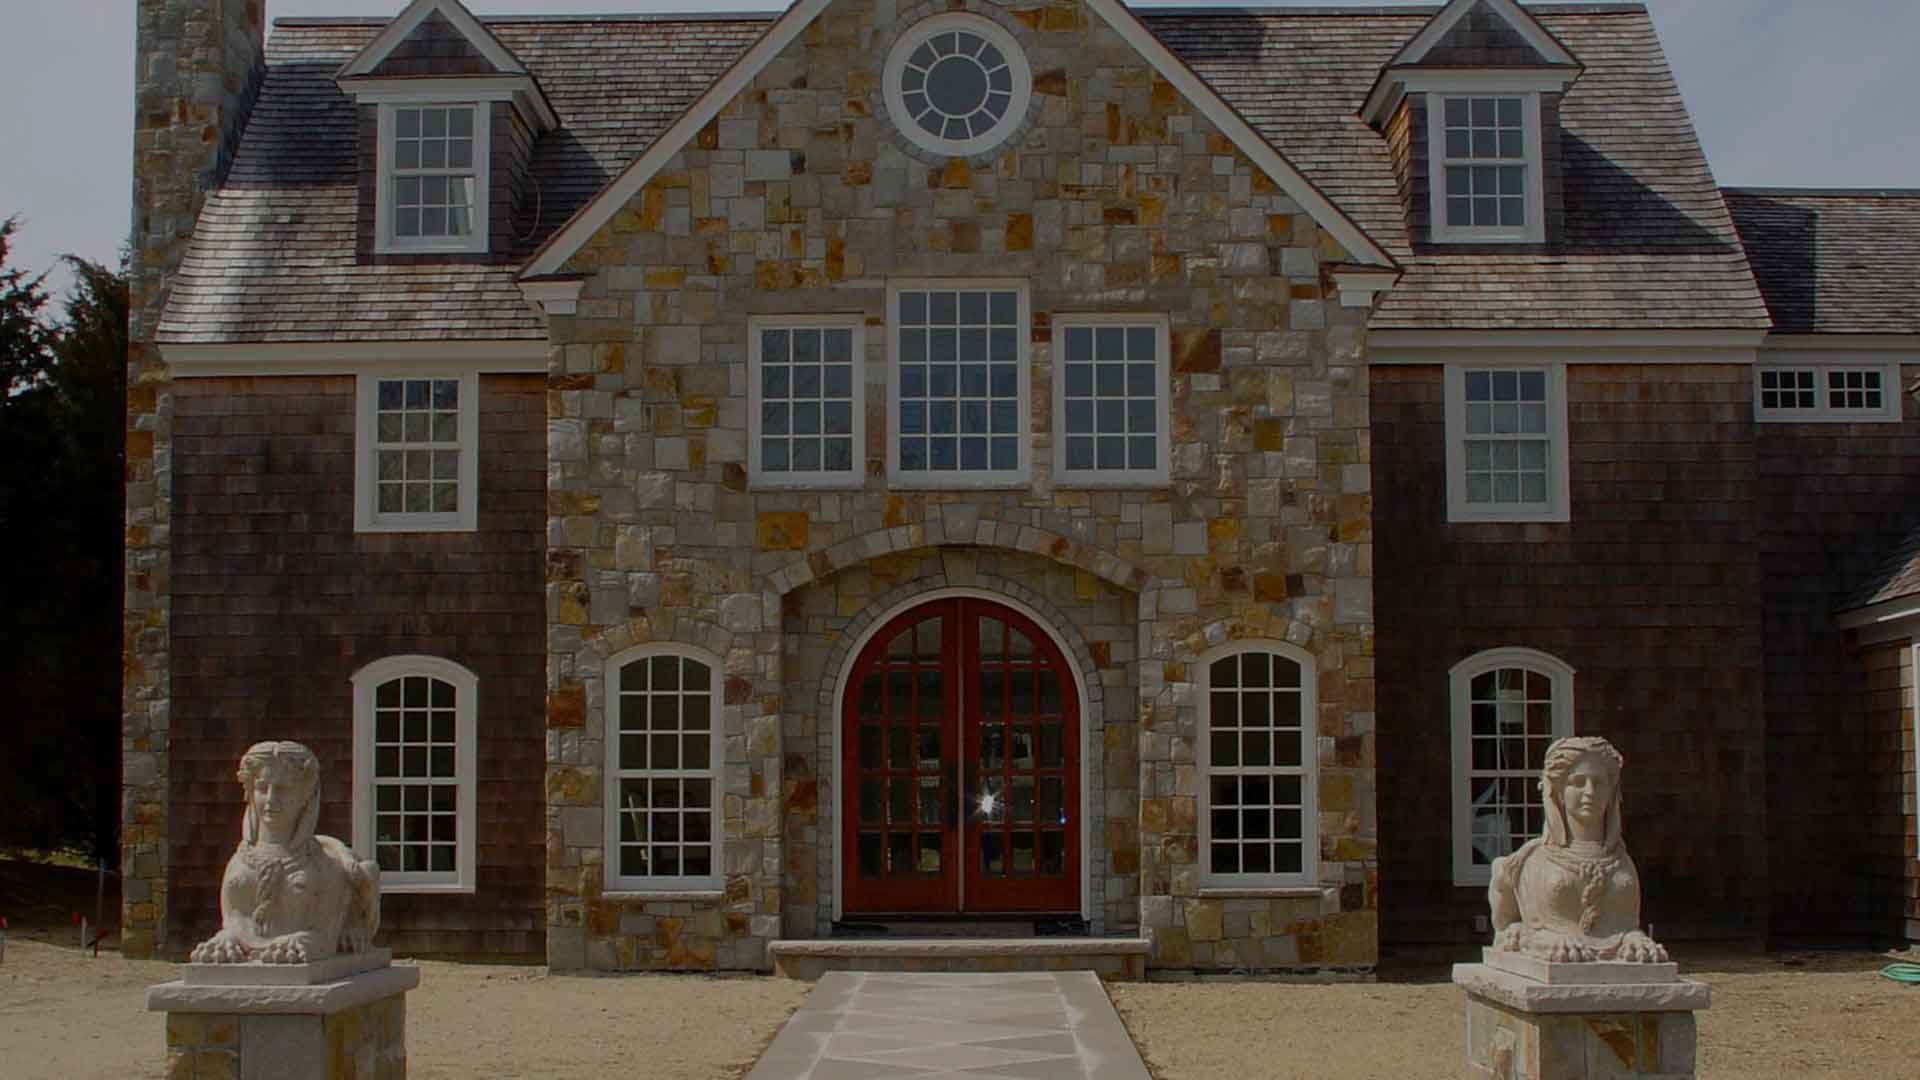 masonary stone work building facades and wall scituate, ma